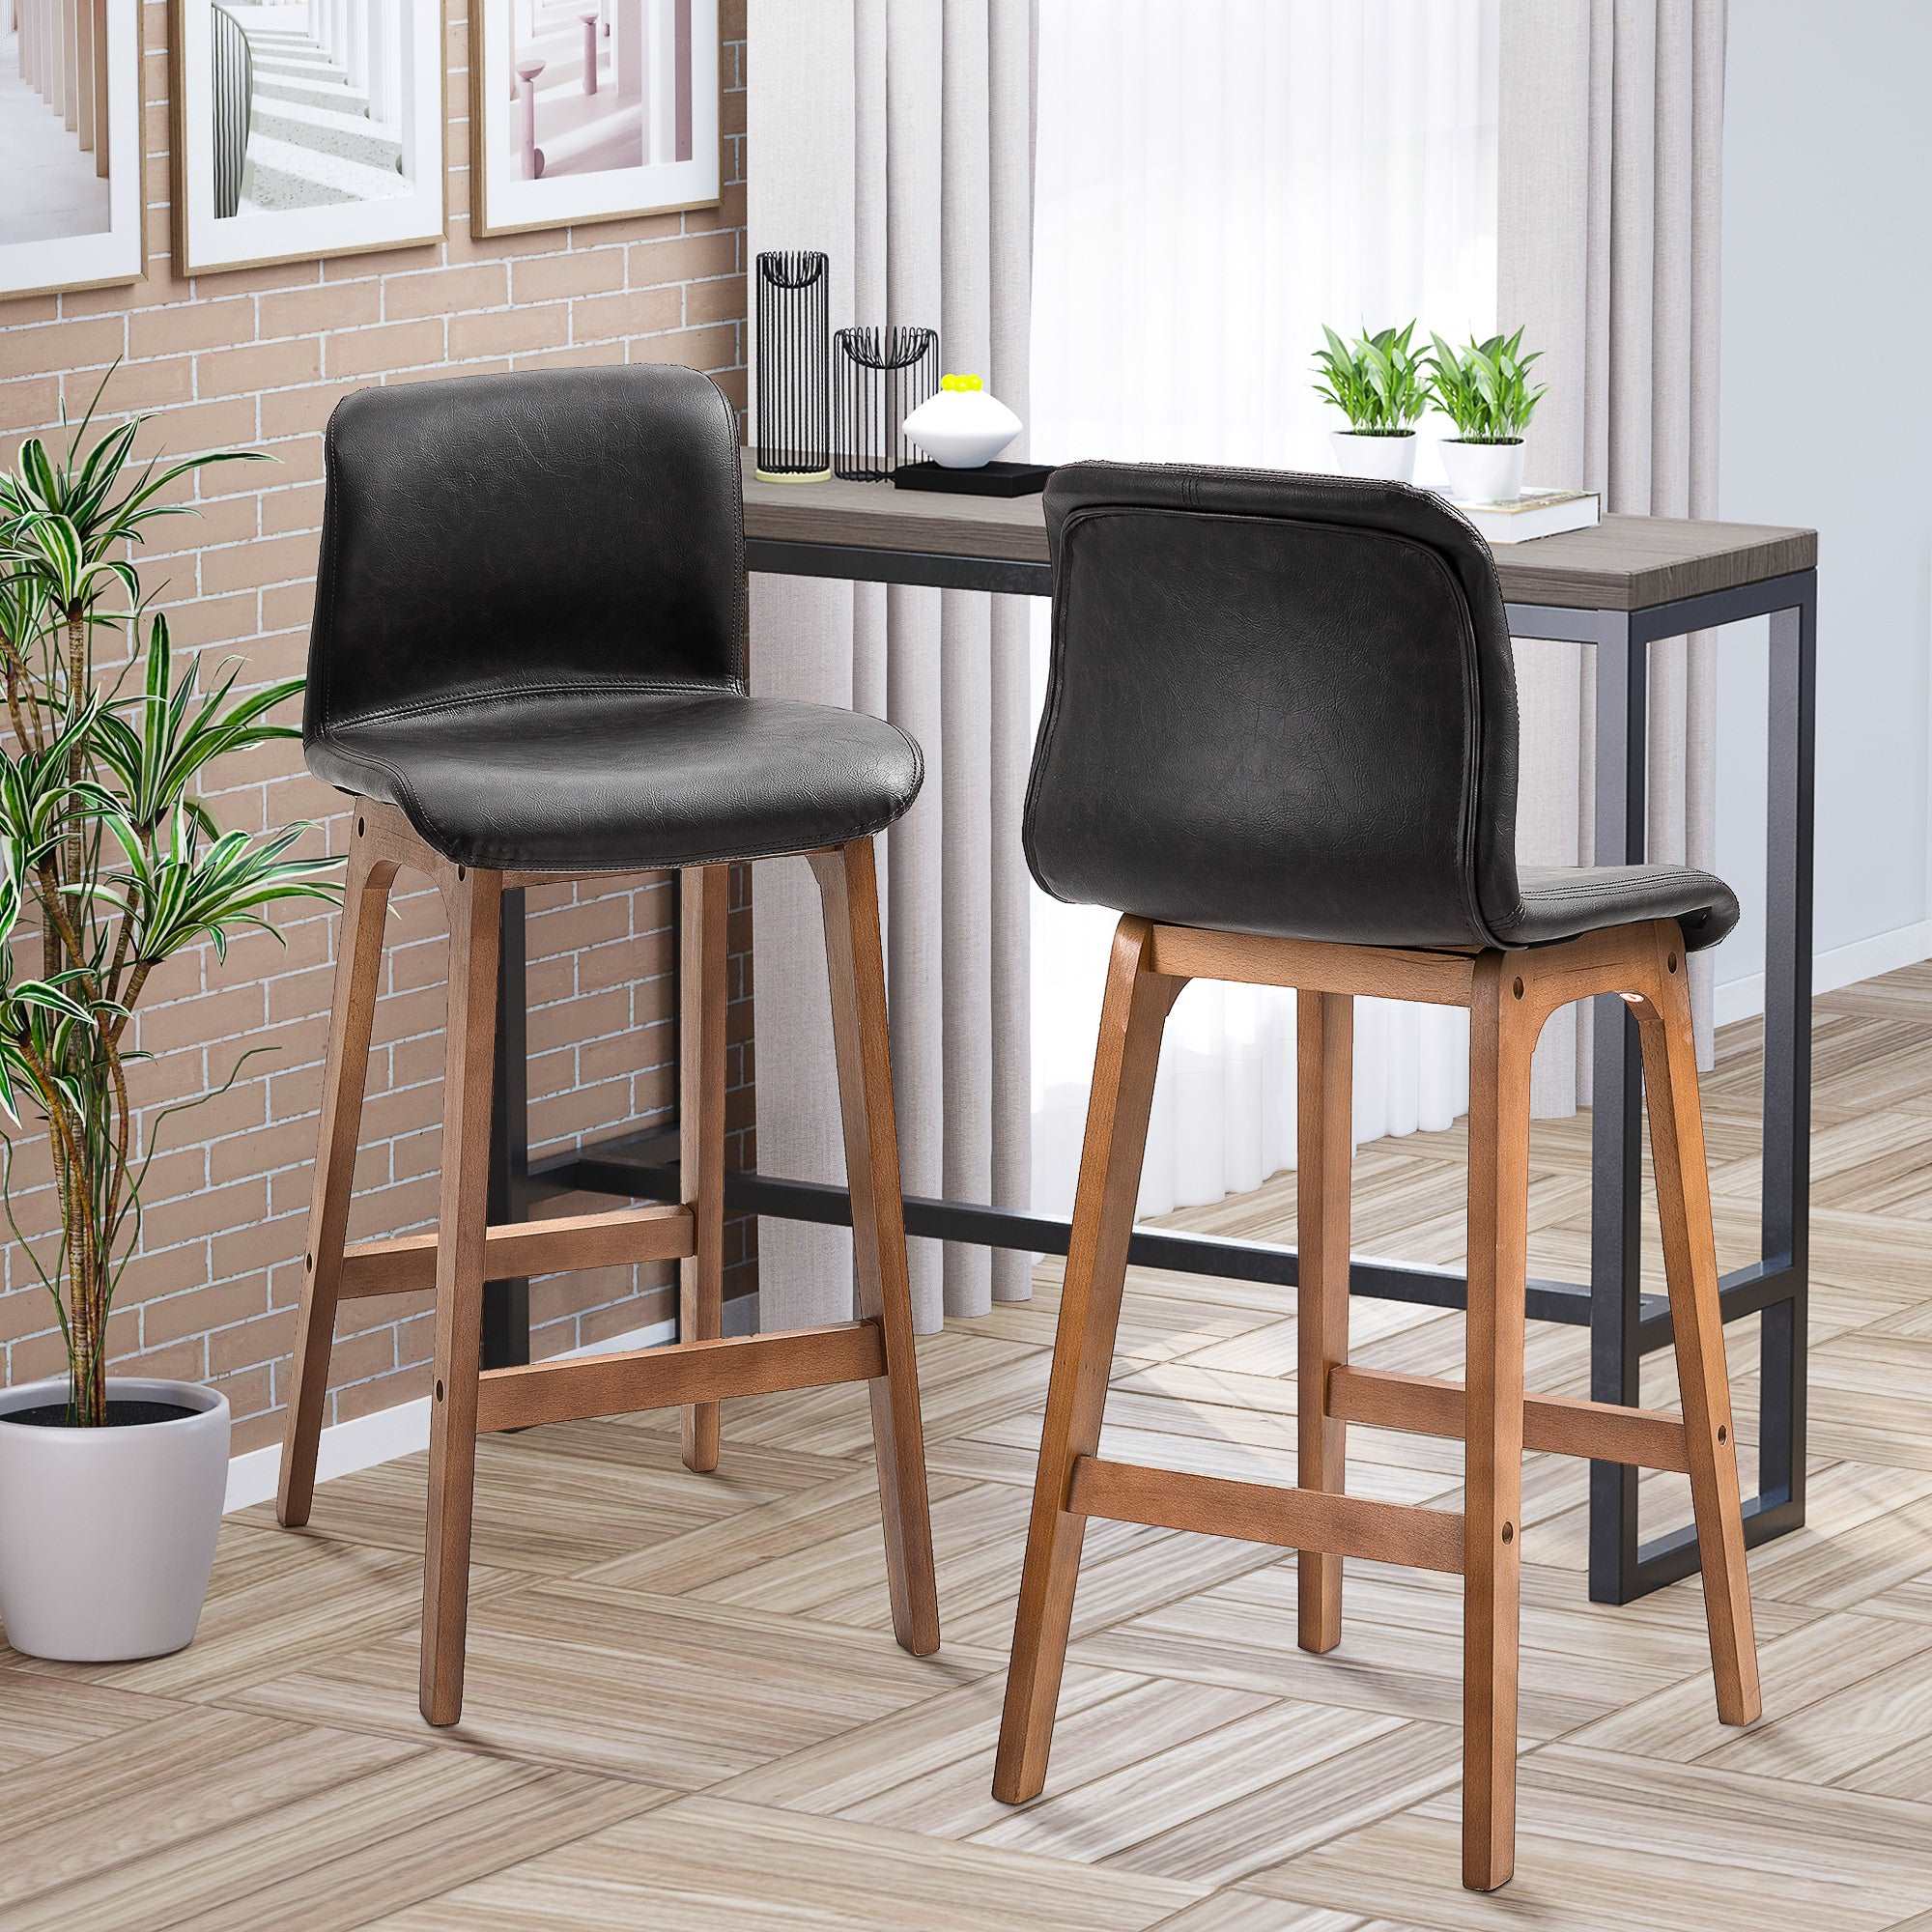 Modern Bar Stools Set of 2, PU Leather Upholstered Bar Chairs with Wooden Frame, Footrest for Home Bar, Dining Room  AOSOM   